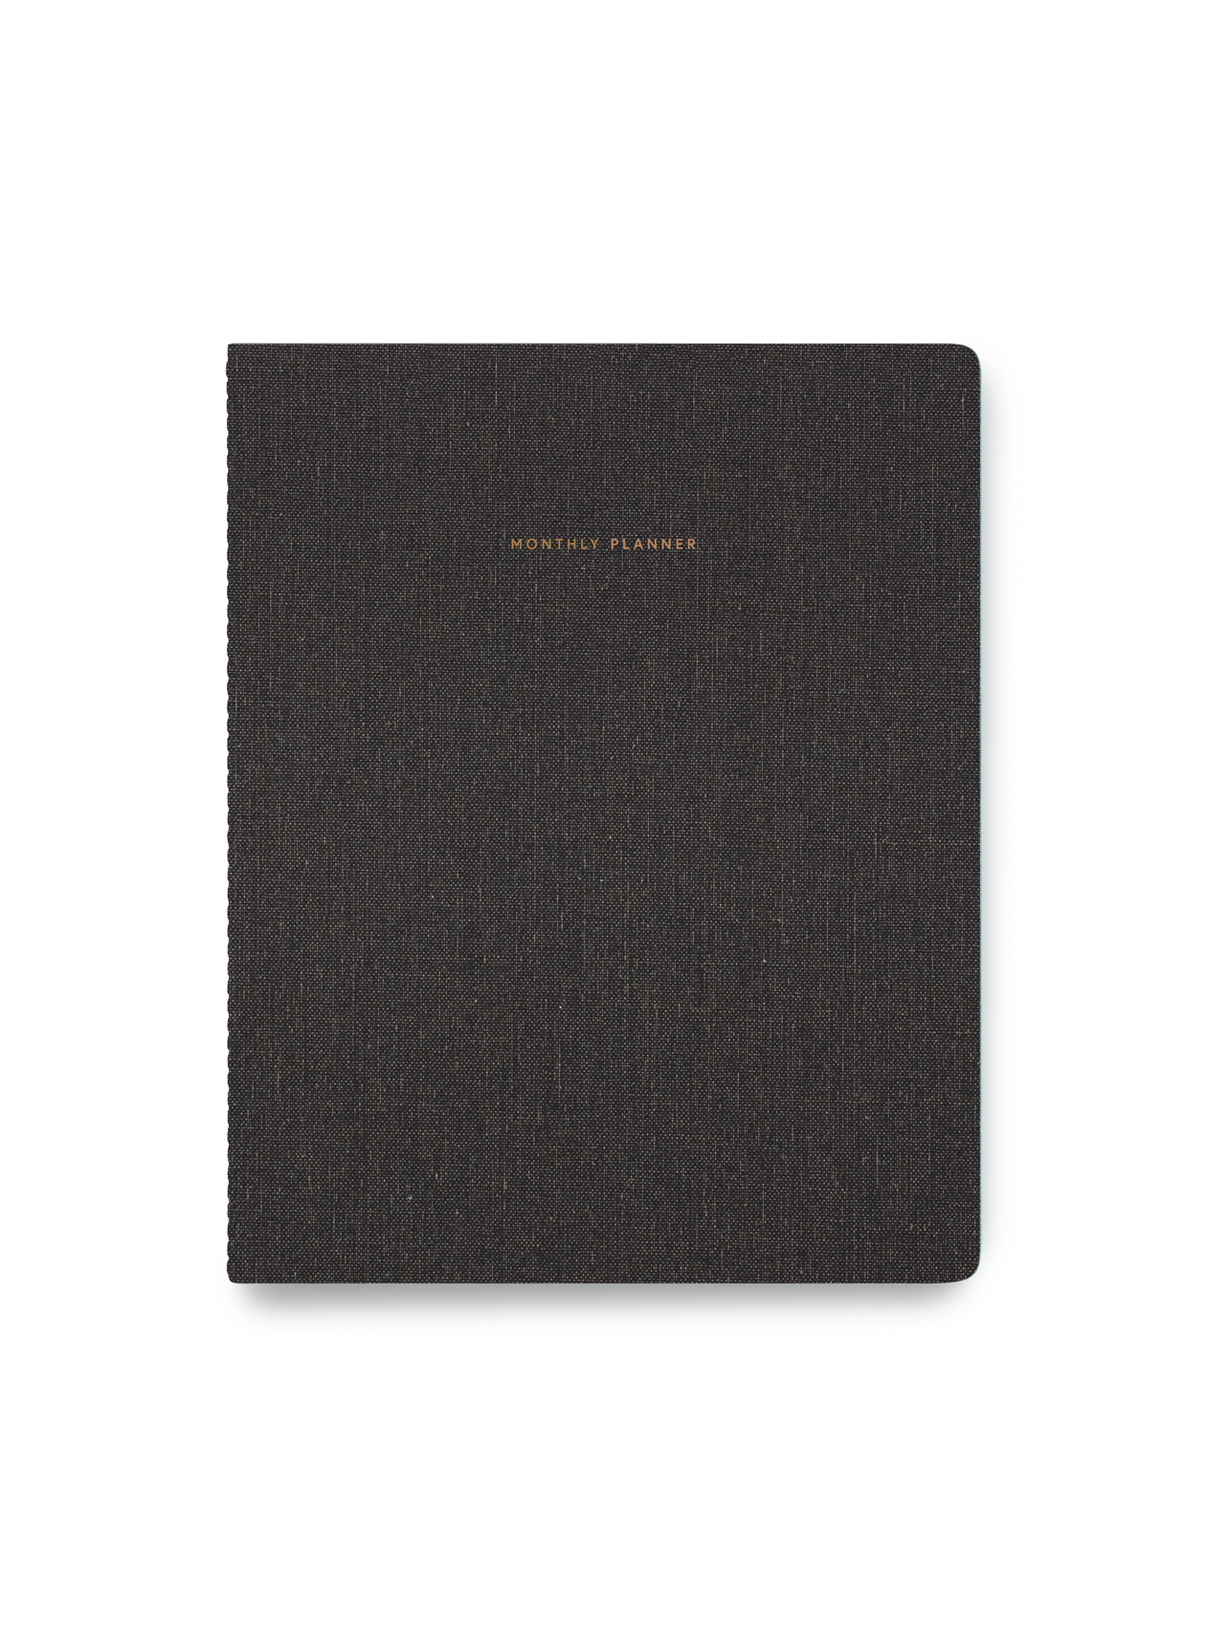 Charcoal Gray Monthly Planner closed front view || Charcoal Gray